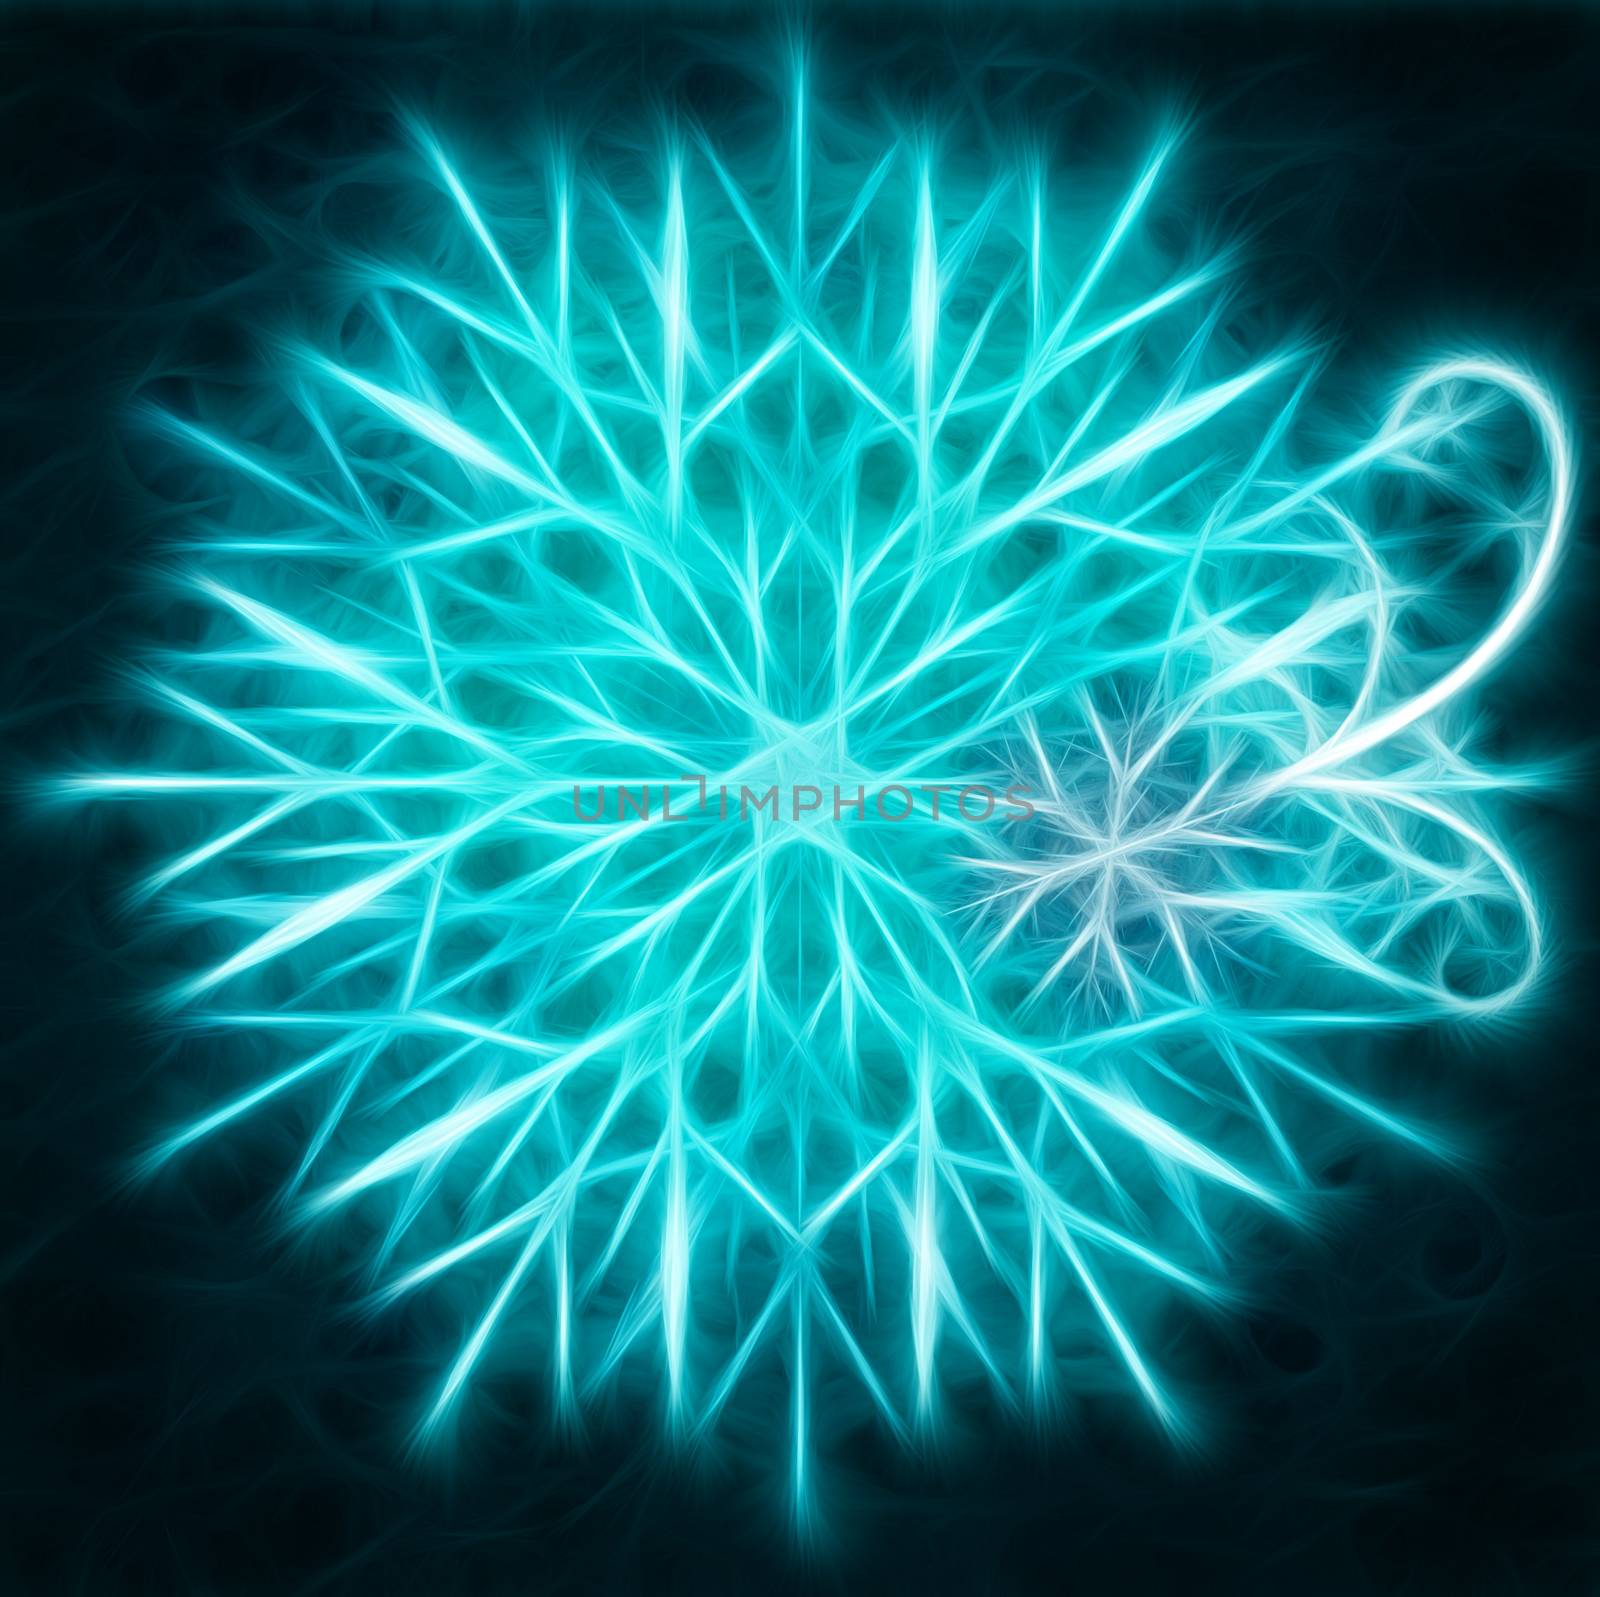 green-blue snowflakes grunge square background